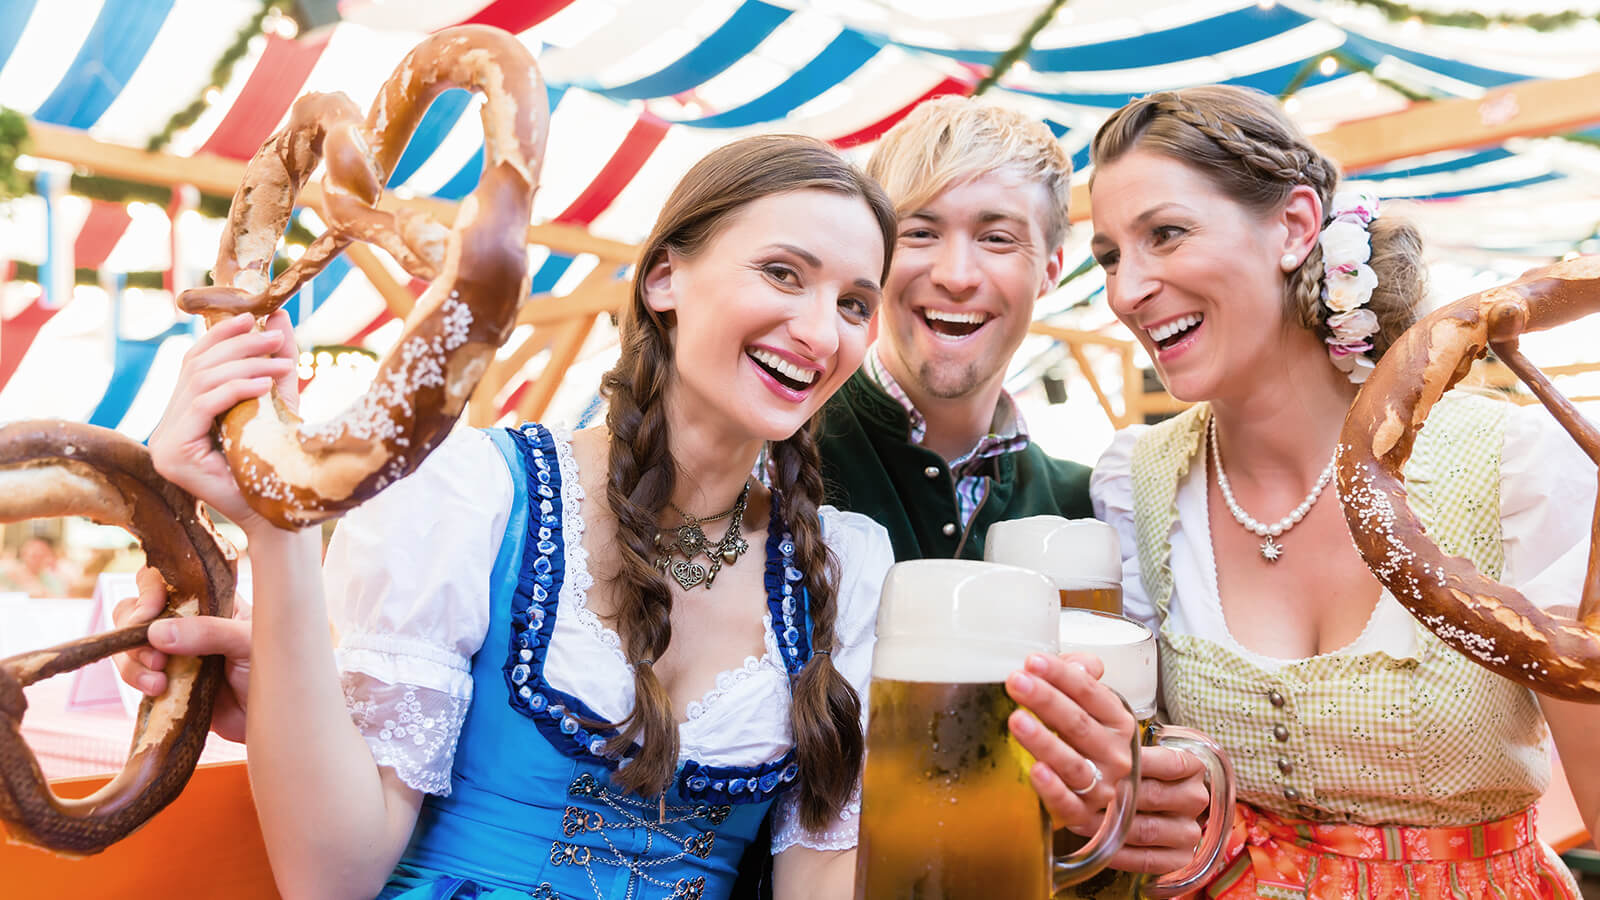 Friends with giant pretzels in Bavarian beer tent for nixplay oktoberfest promo